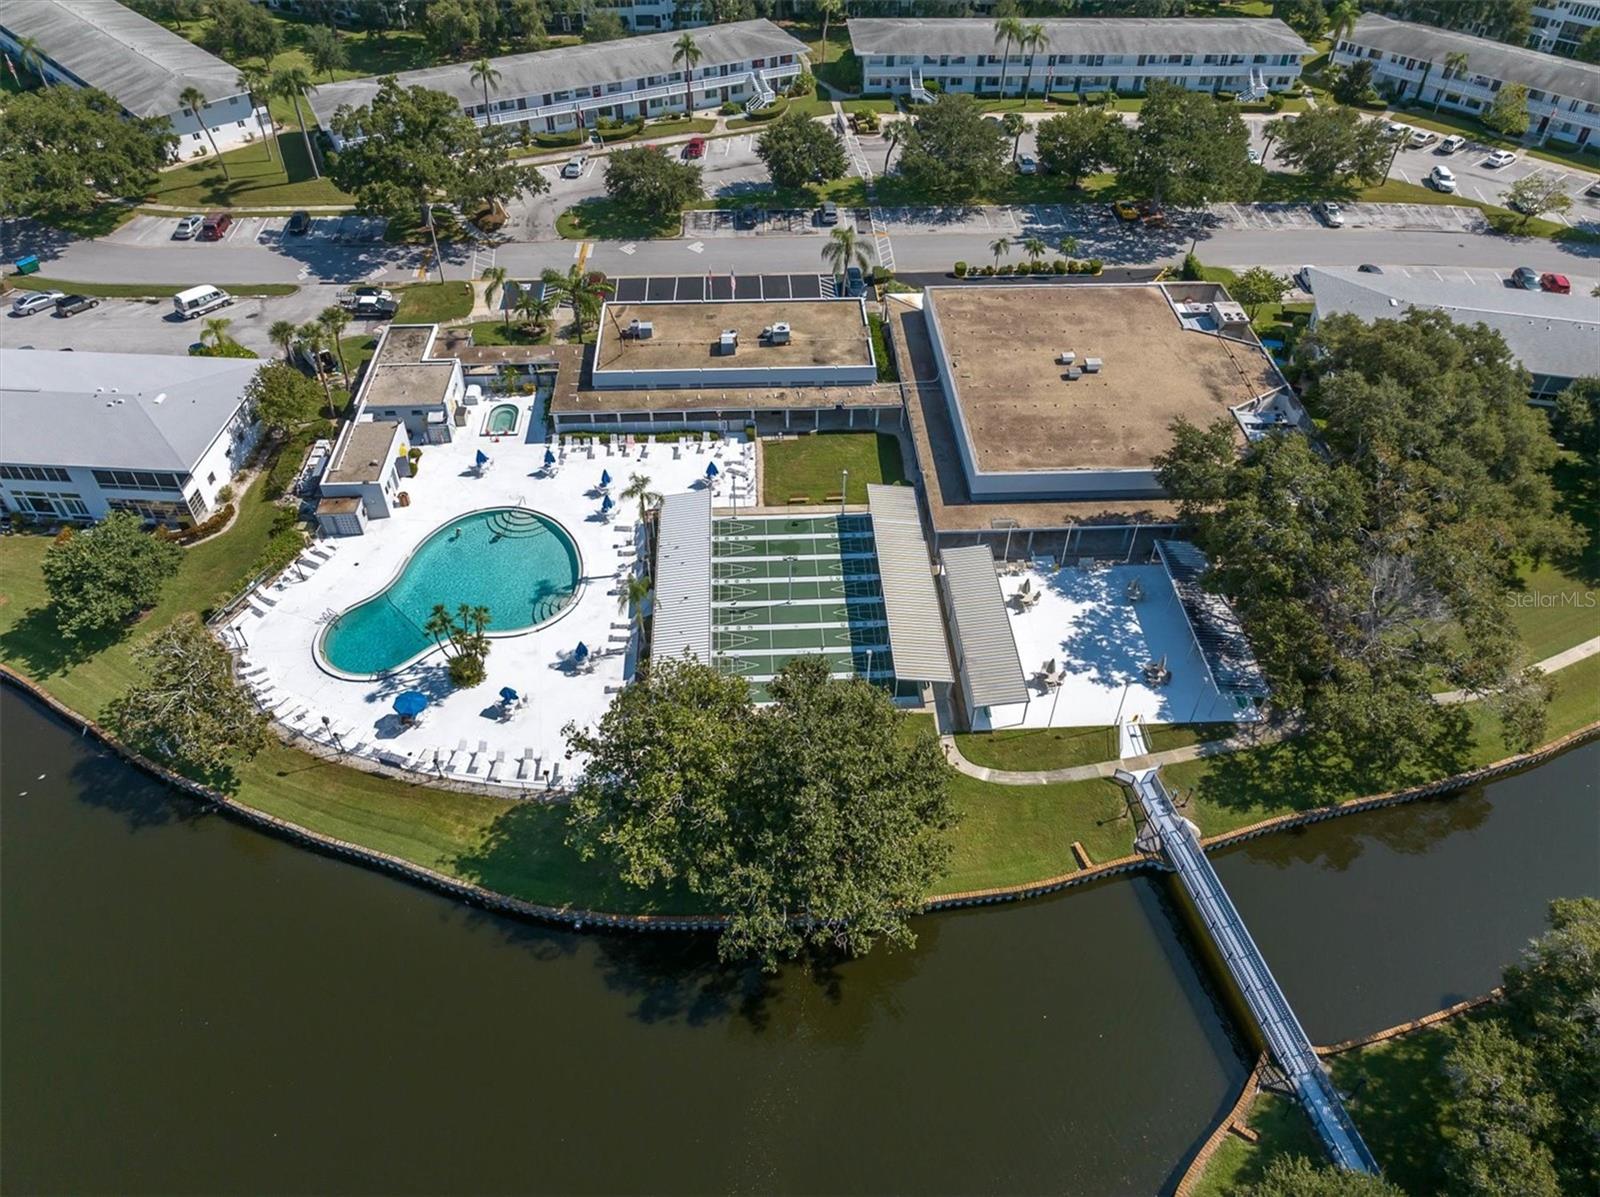 The Recreation Center at Seminole Gardens is right on the lake.